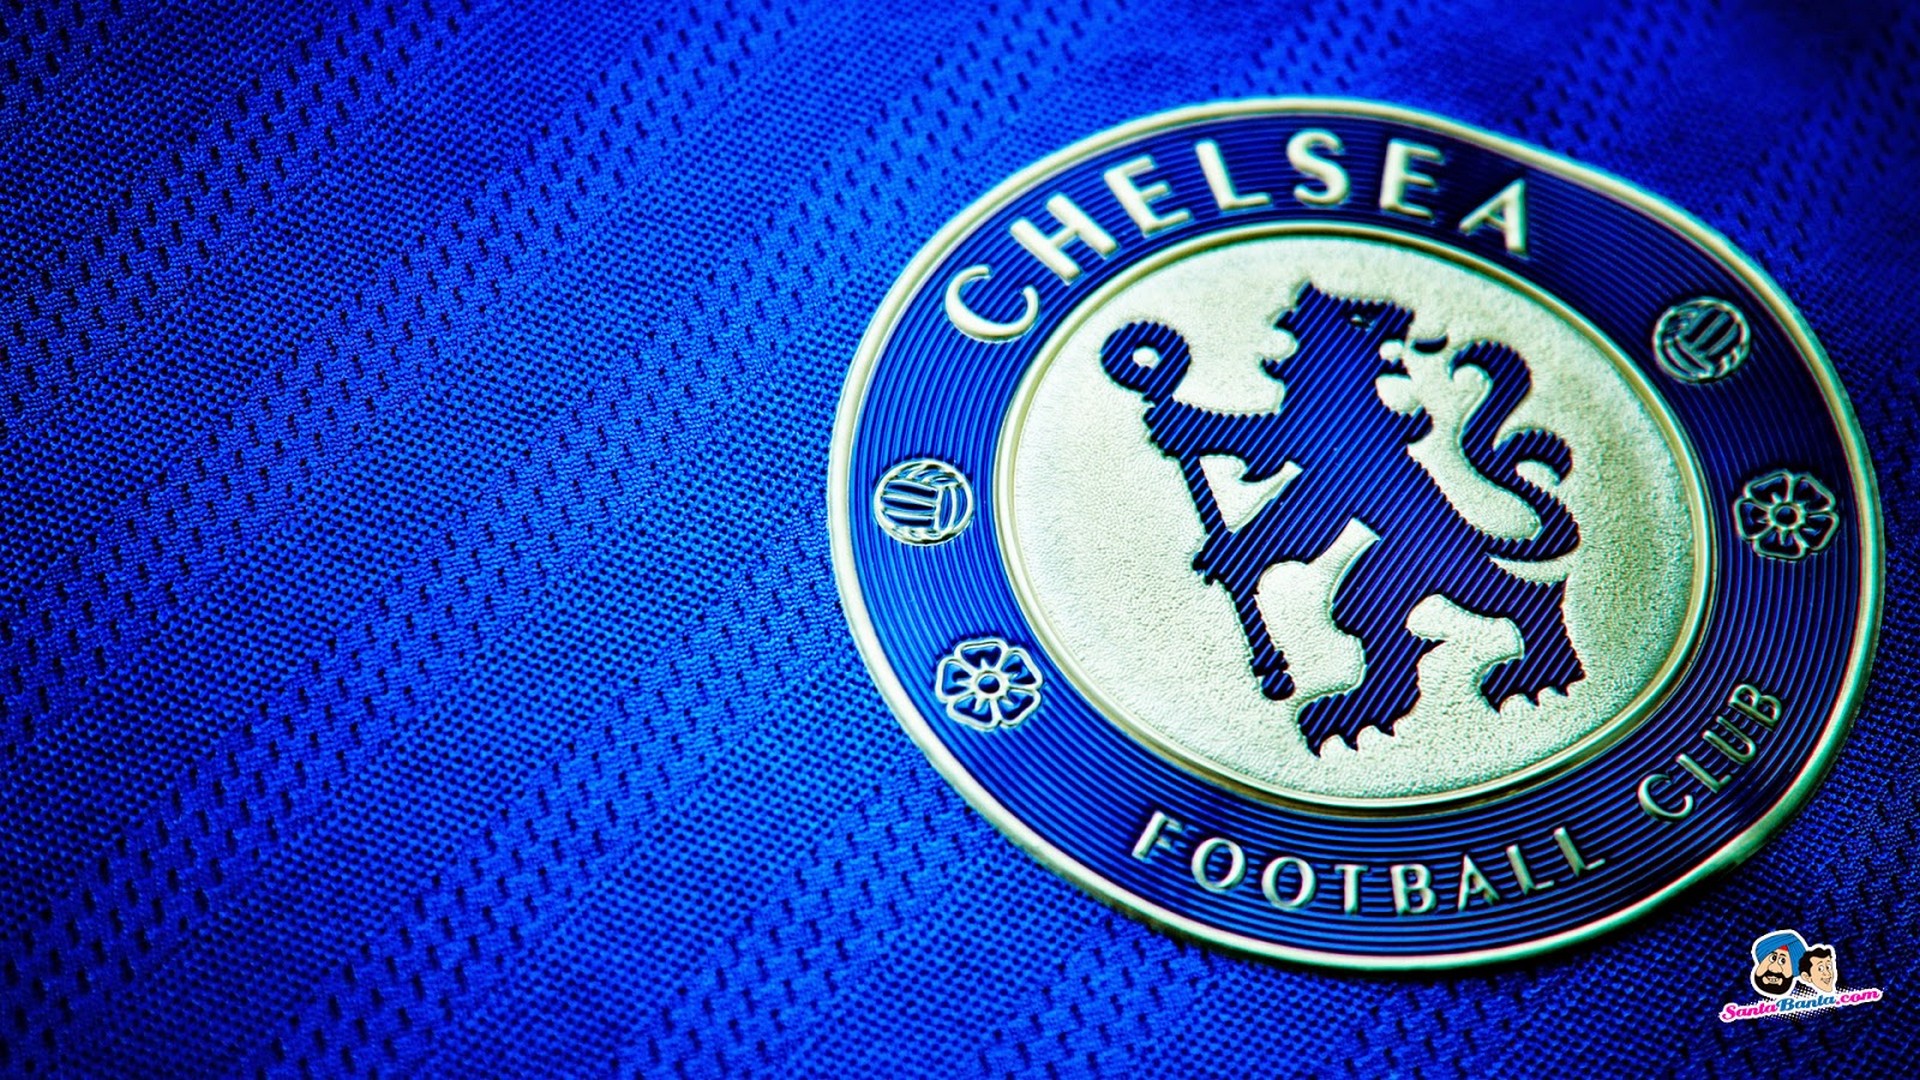 Chelsea Soccer Wallpaper With Resolution 1920X1080 pixel. You can make this wallpaper for your Mac or Windows Desktop Background, iPhone, Android or Tablet and another Smartphone device for free